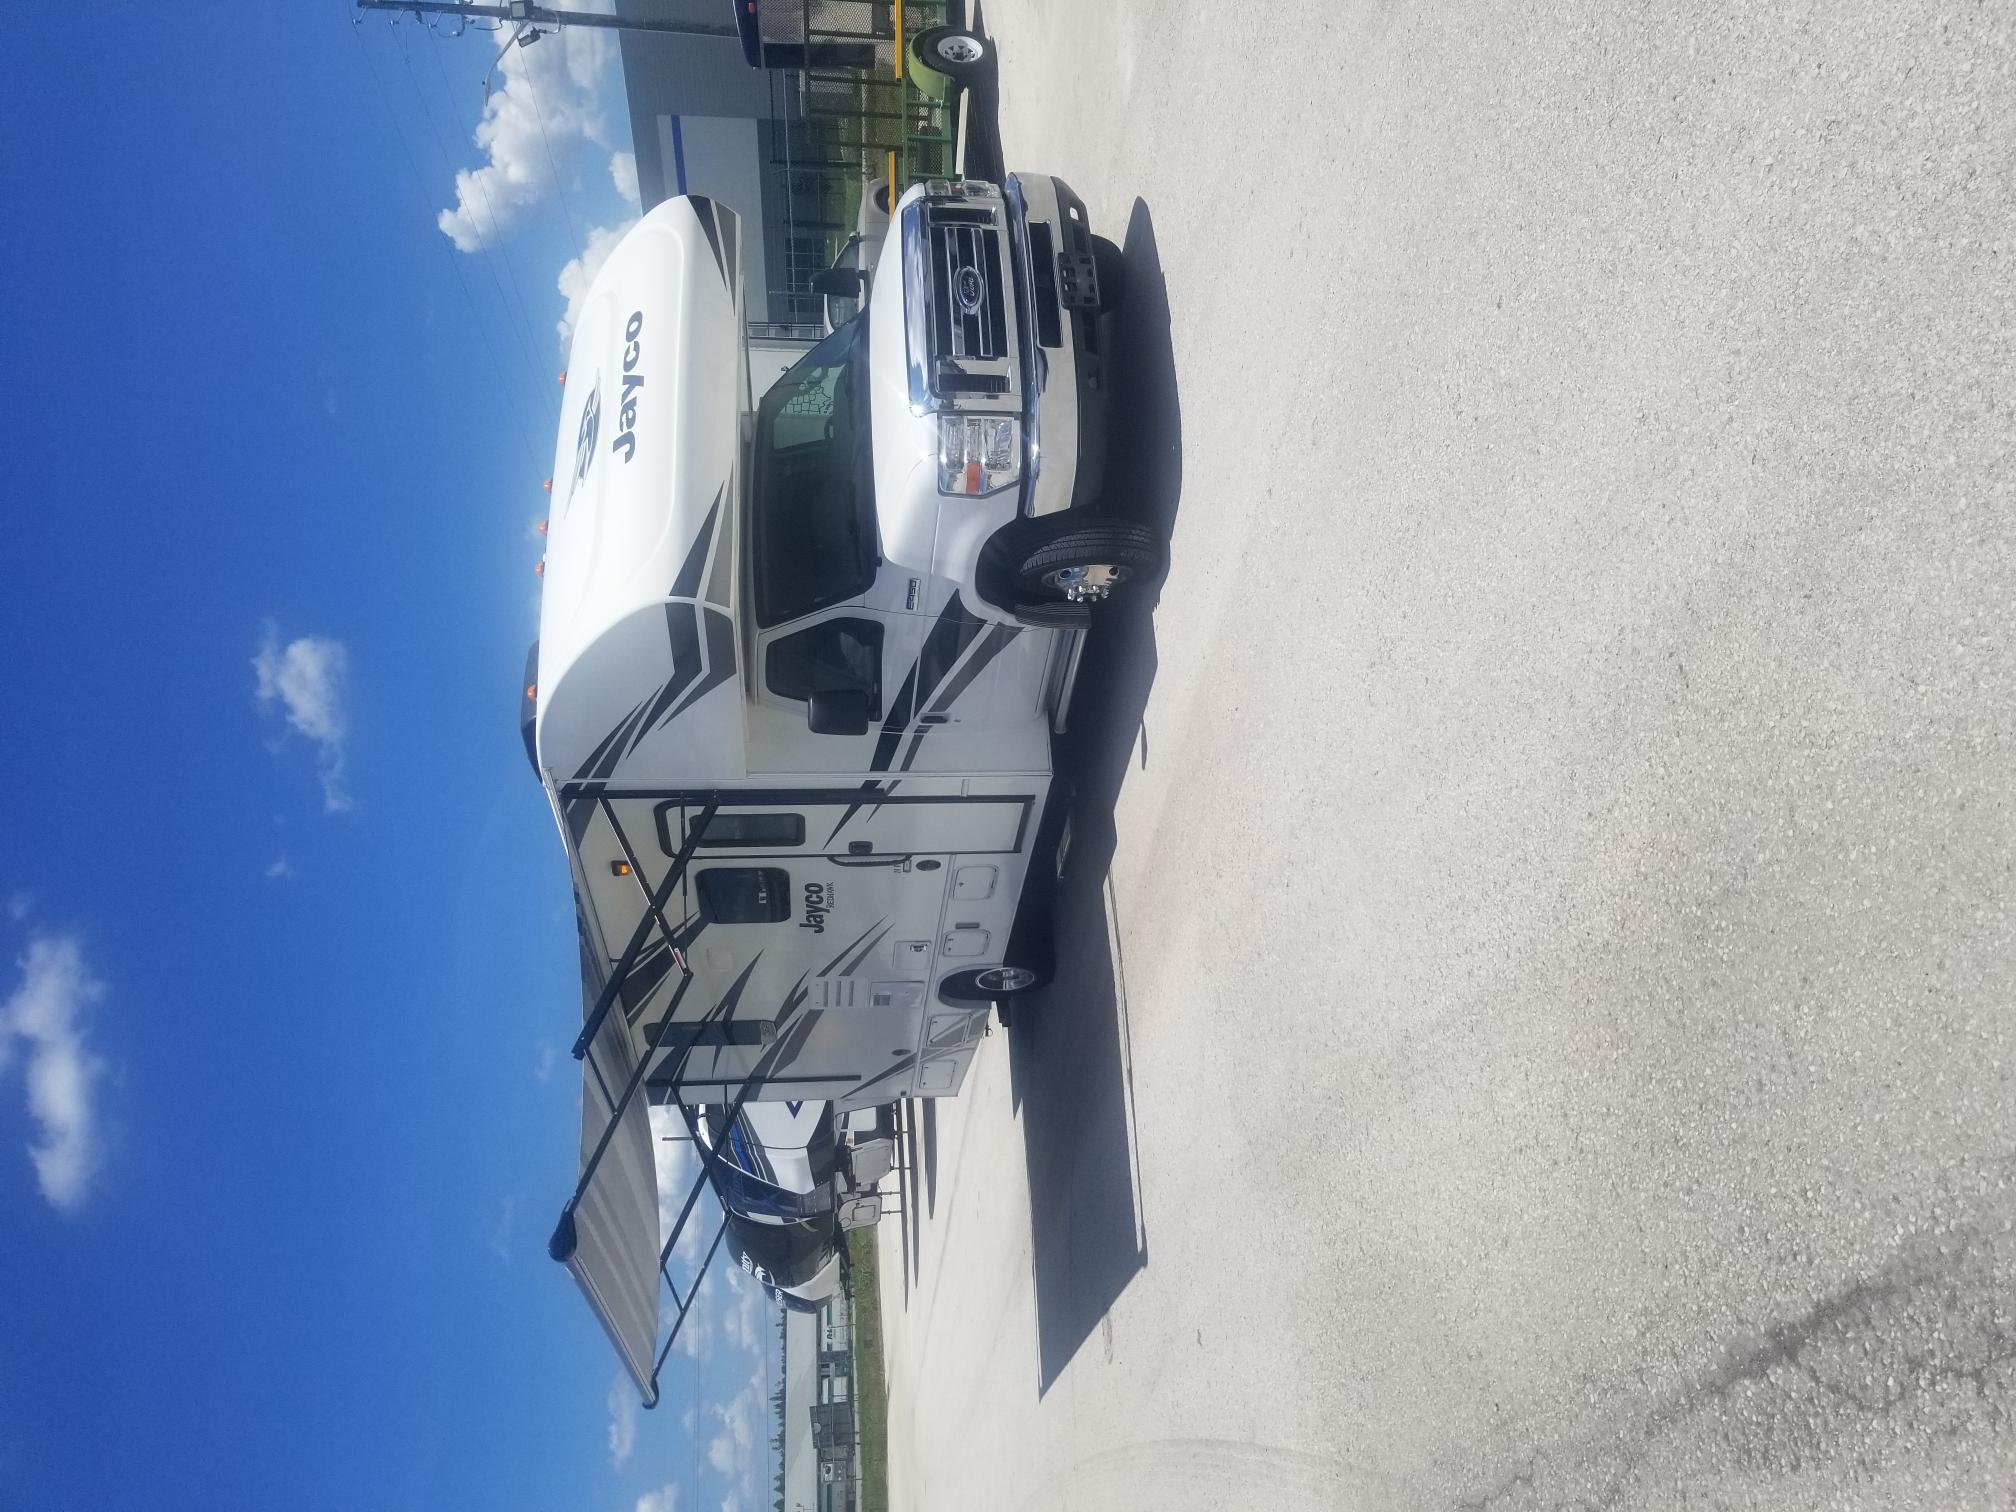 A white rv parked in a parking lot.